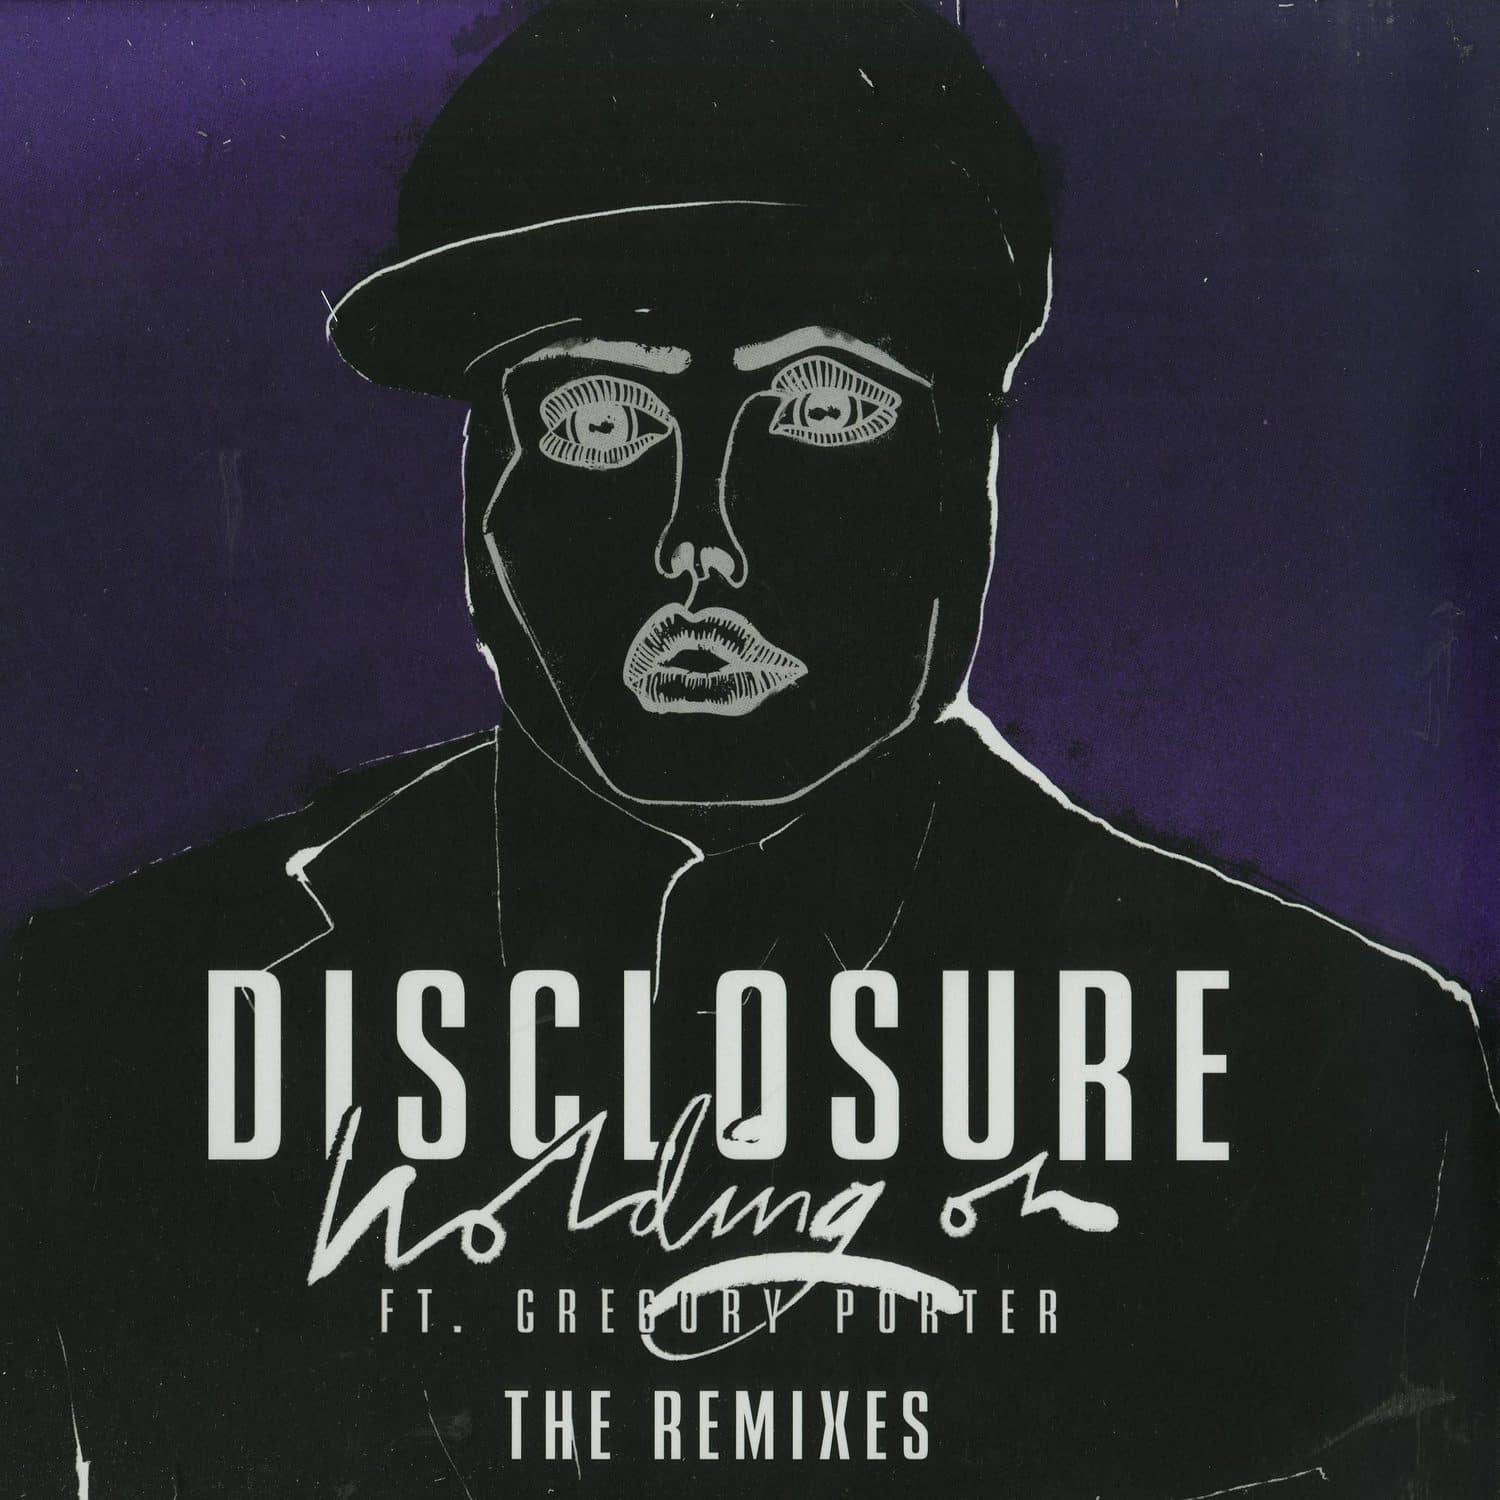 Disclosure ft. Gregory Porter - HOLDING ON - THE REMIXES